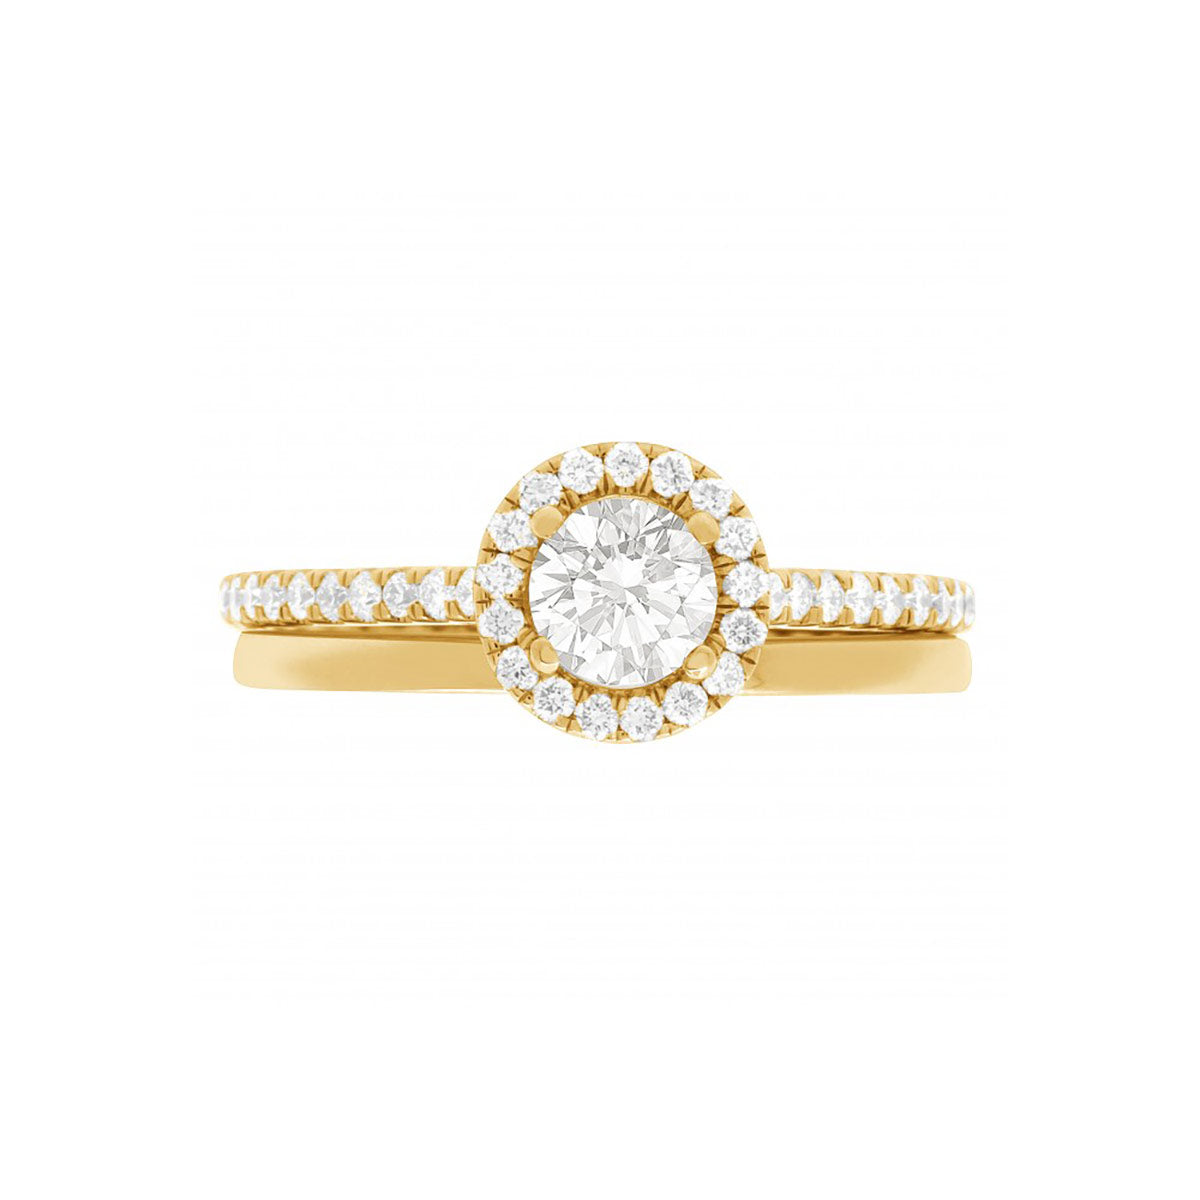 Round Halo Diamond Ring in yellow gold with a matching plain wedding band, on a white background